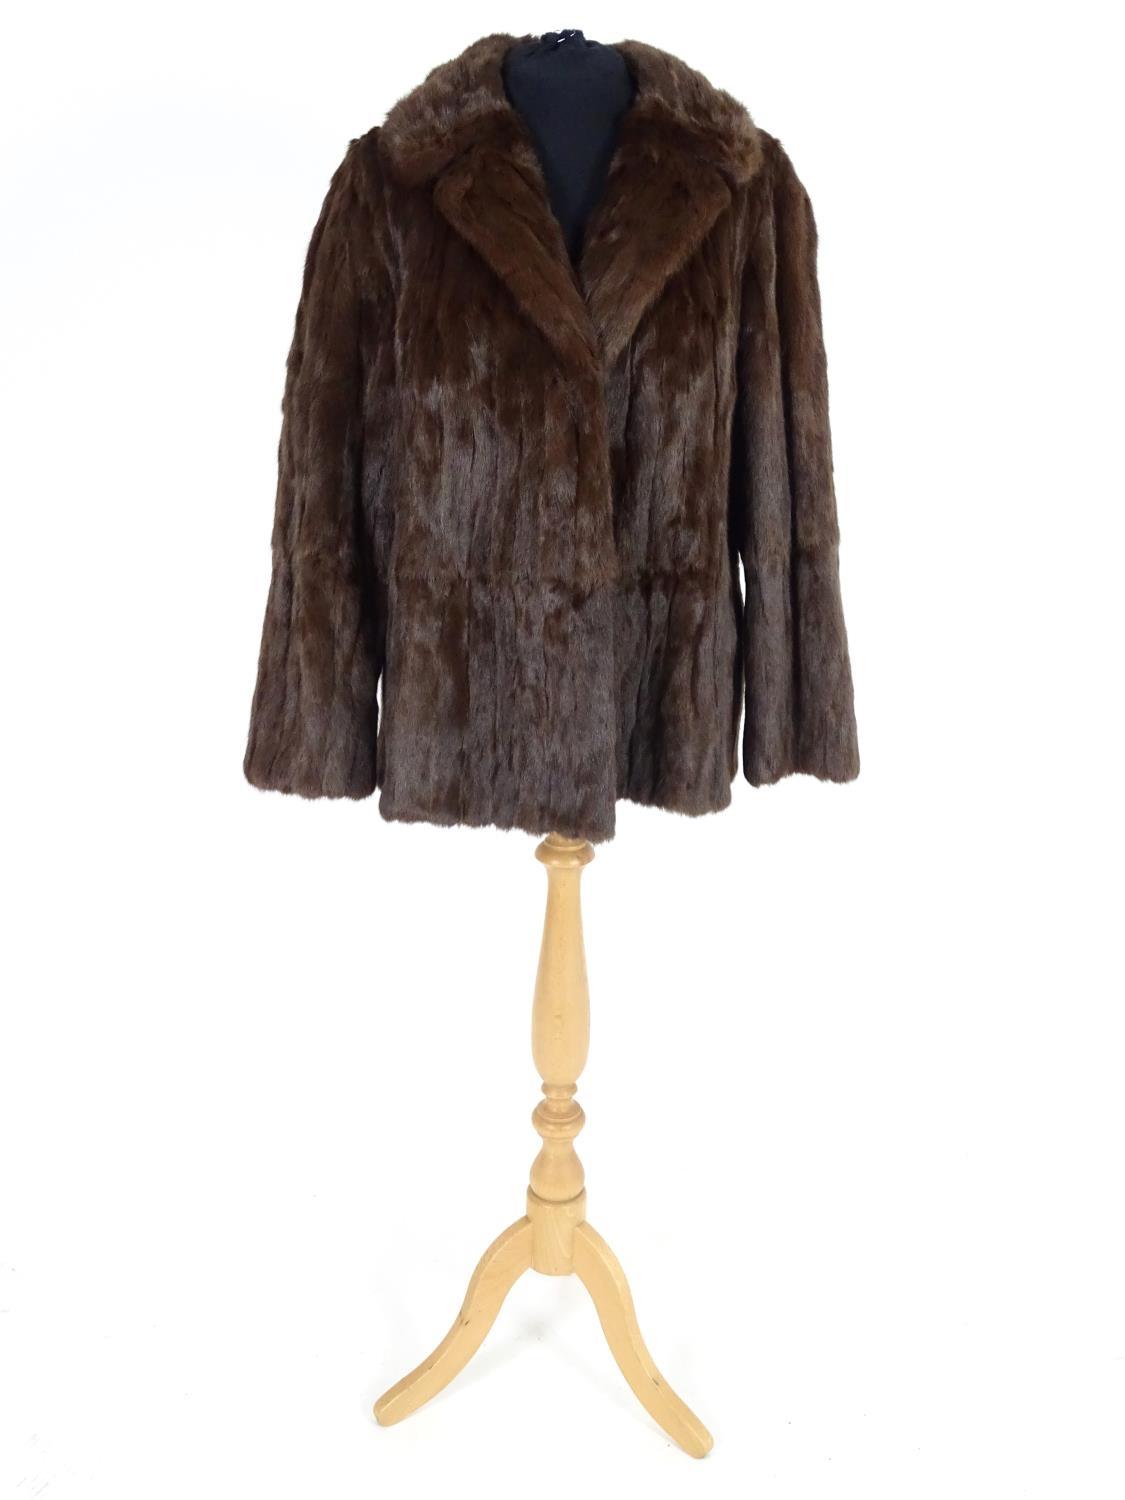 A vintage short length fur coat. Bust size 38" approx Please Note - we do not make reference to